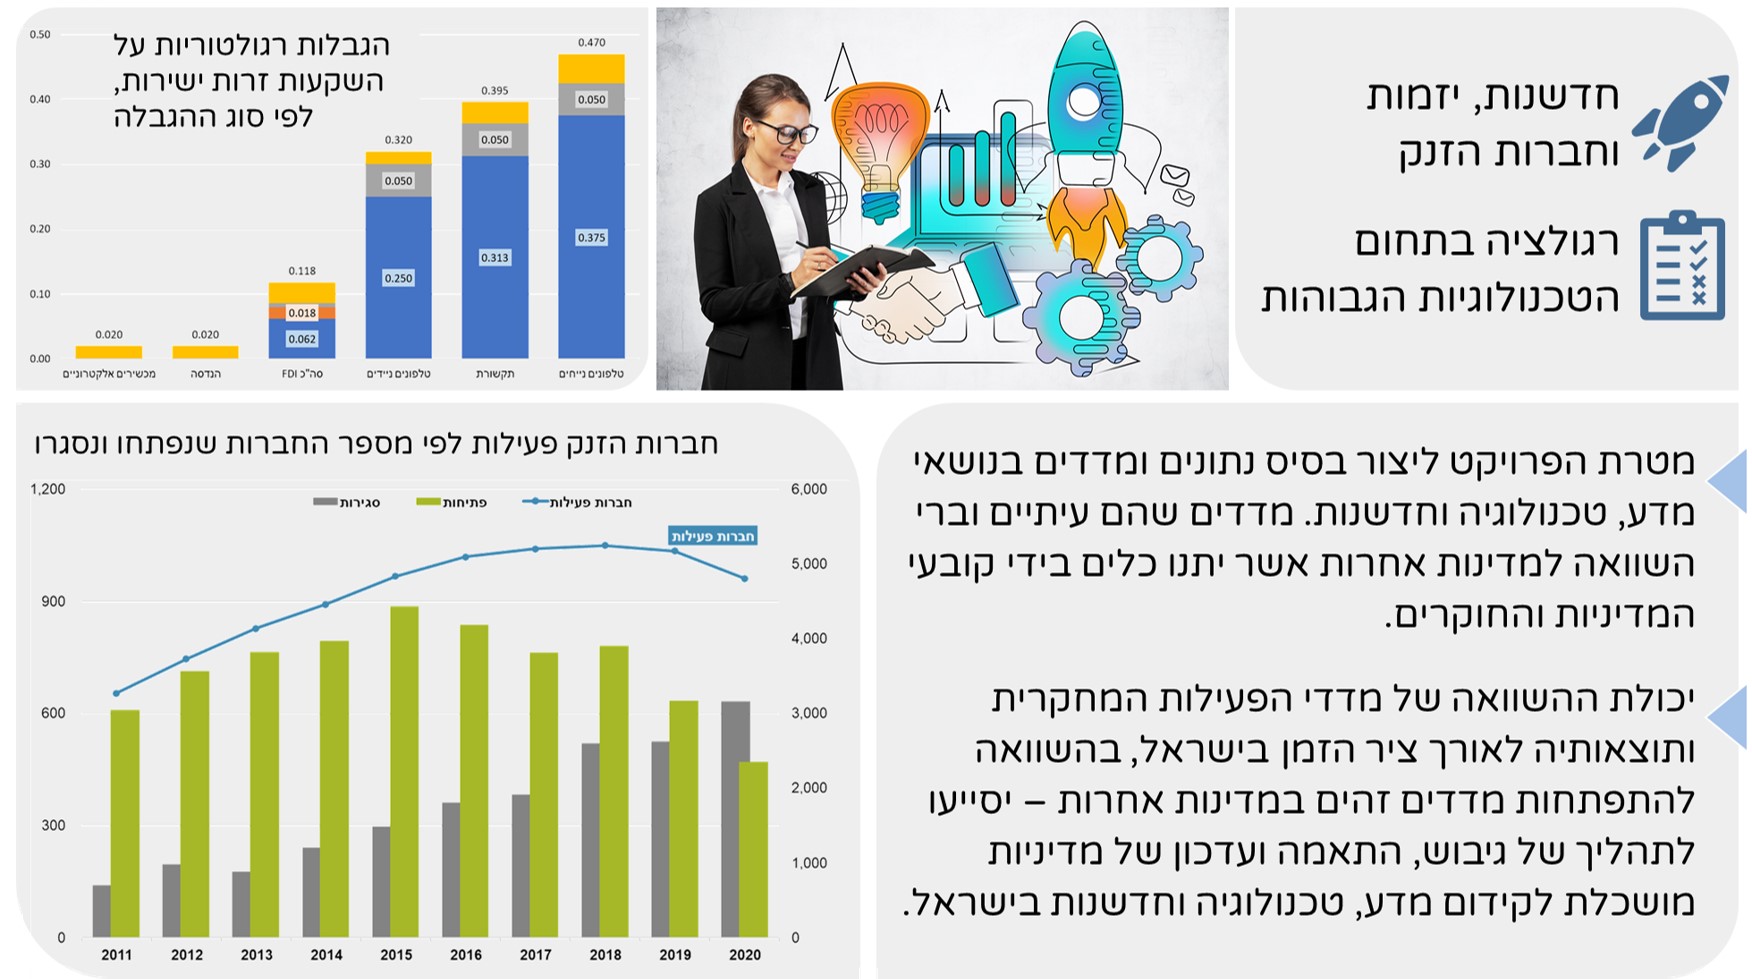 Dash_Science, Technology and Innovation Indicators in Israel_20220324092907.793.jpg